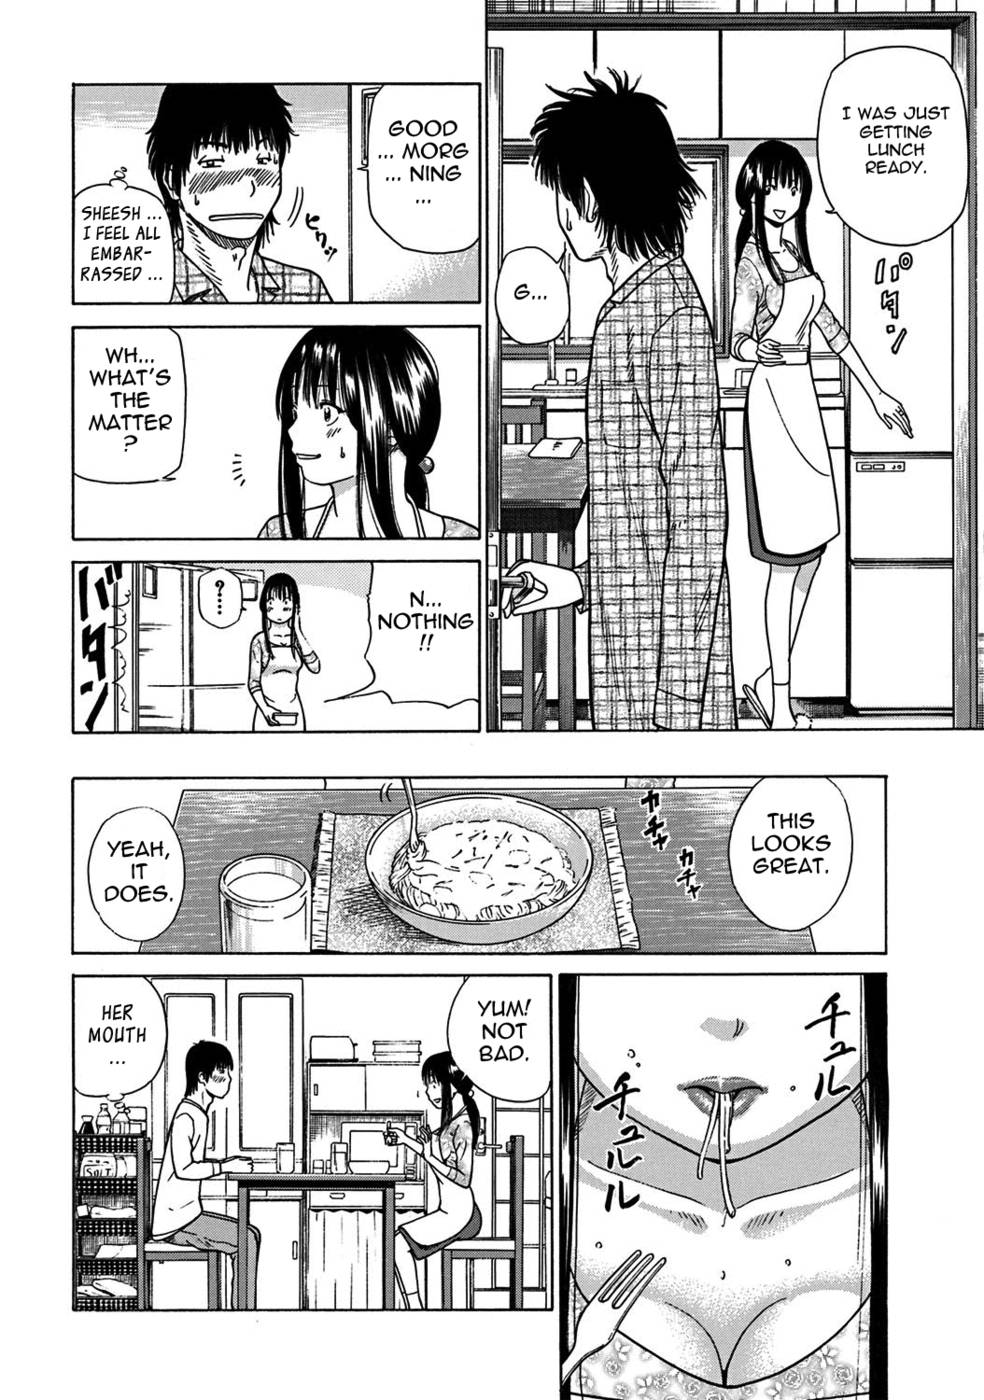 Hentai Manga Comic-33 Year Old Unsatisfied Wife-Chapter 10-Let's Just Do It-4